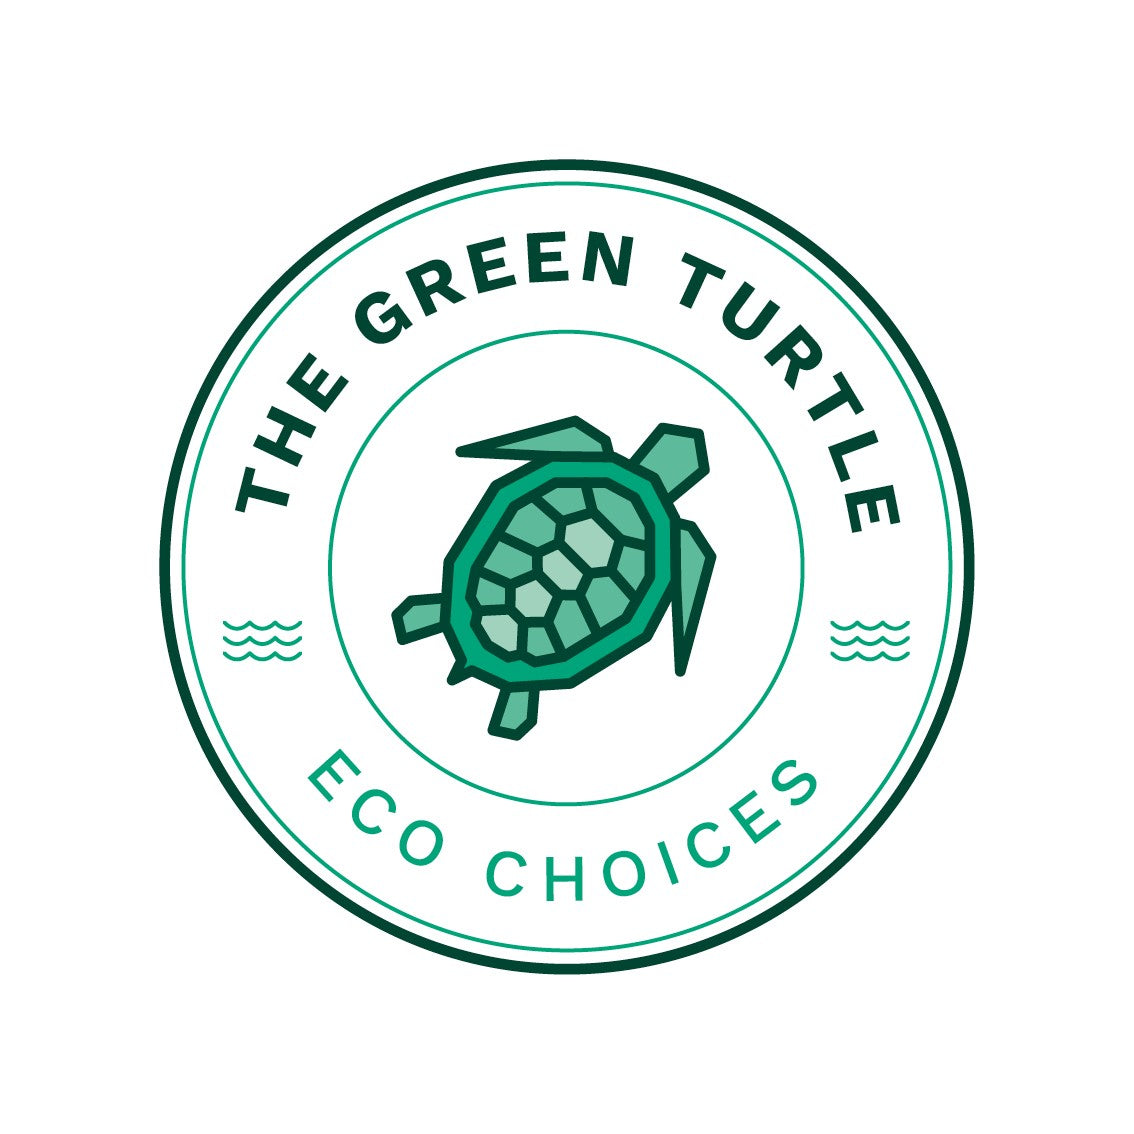 The Green turtle logo - a geometric green turtle with the text 'Eco choices'